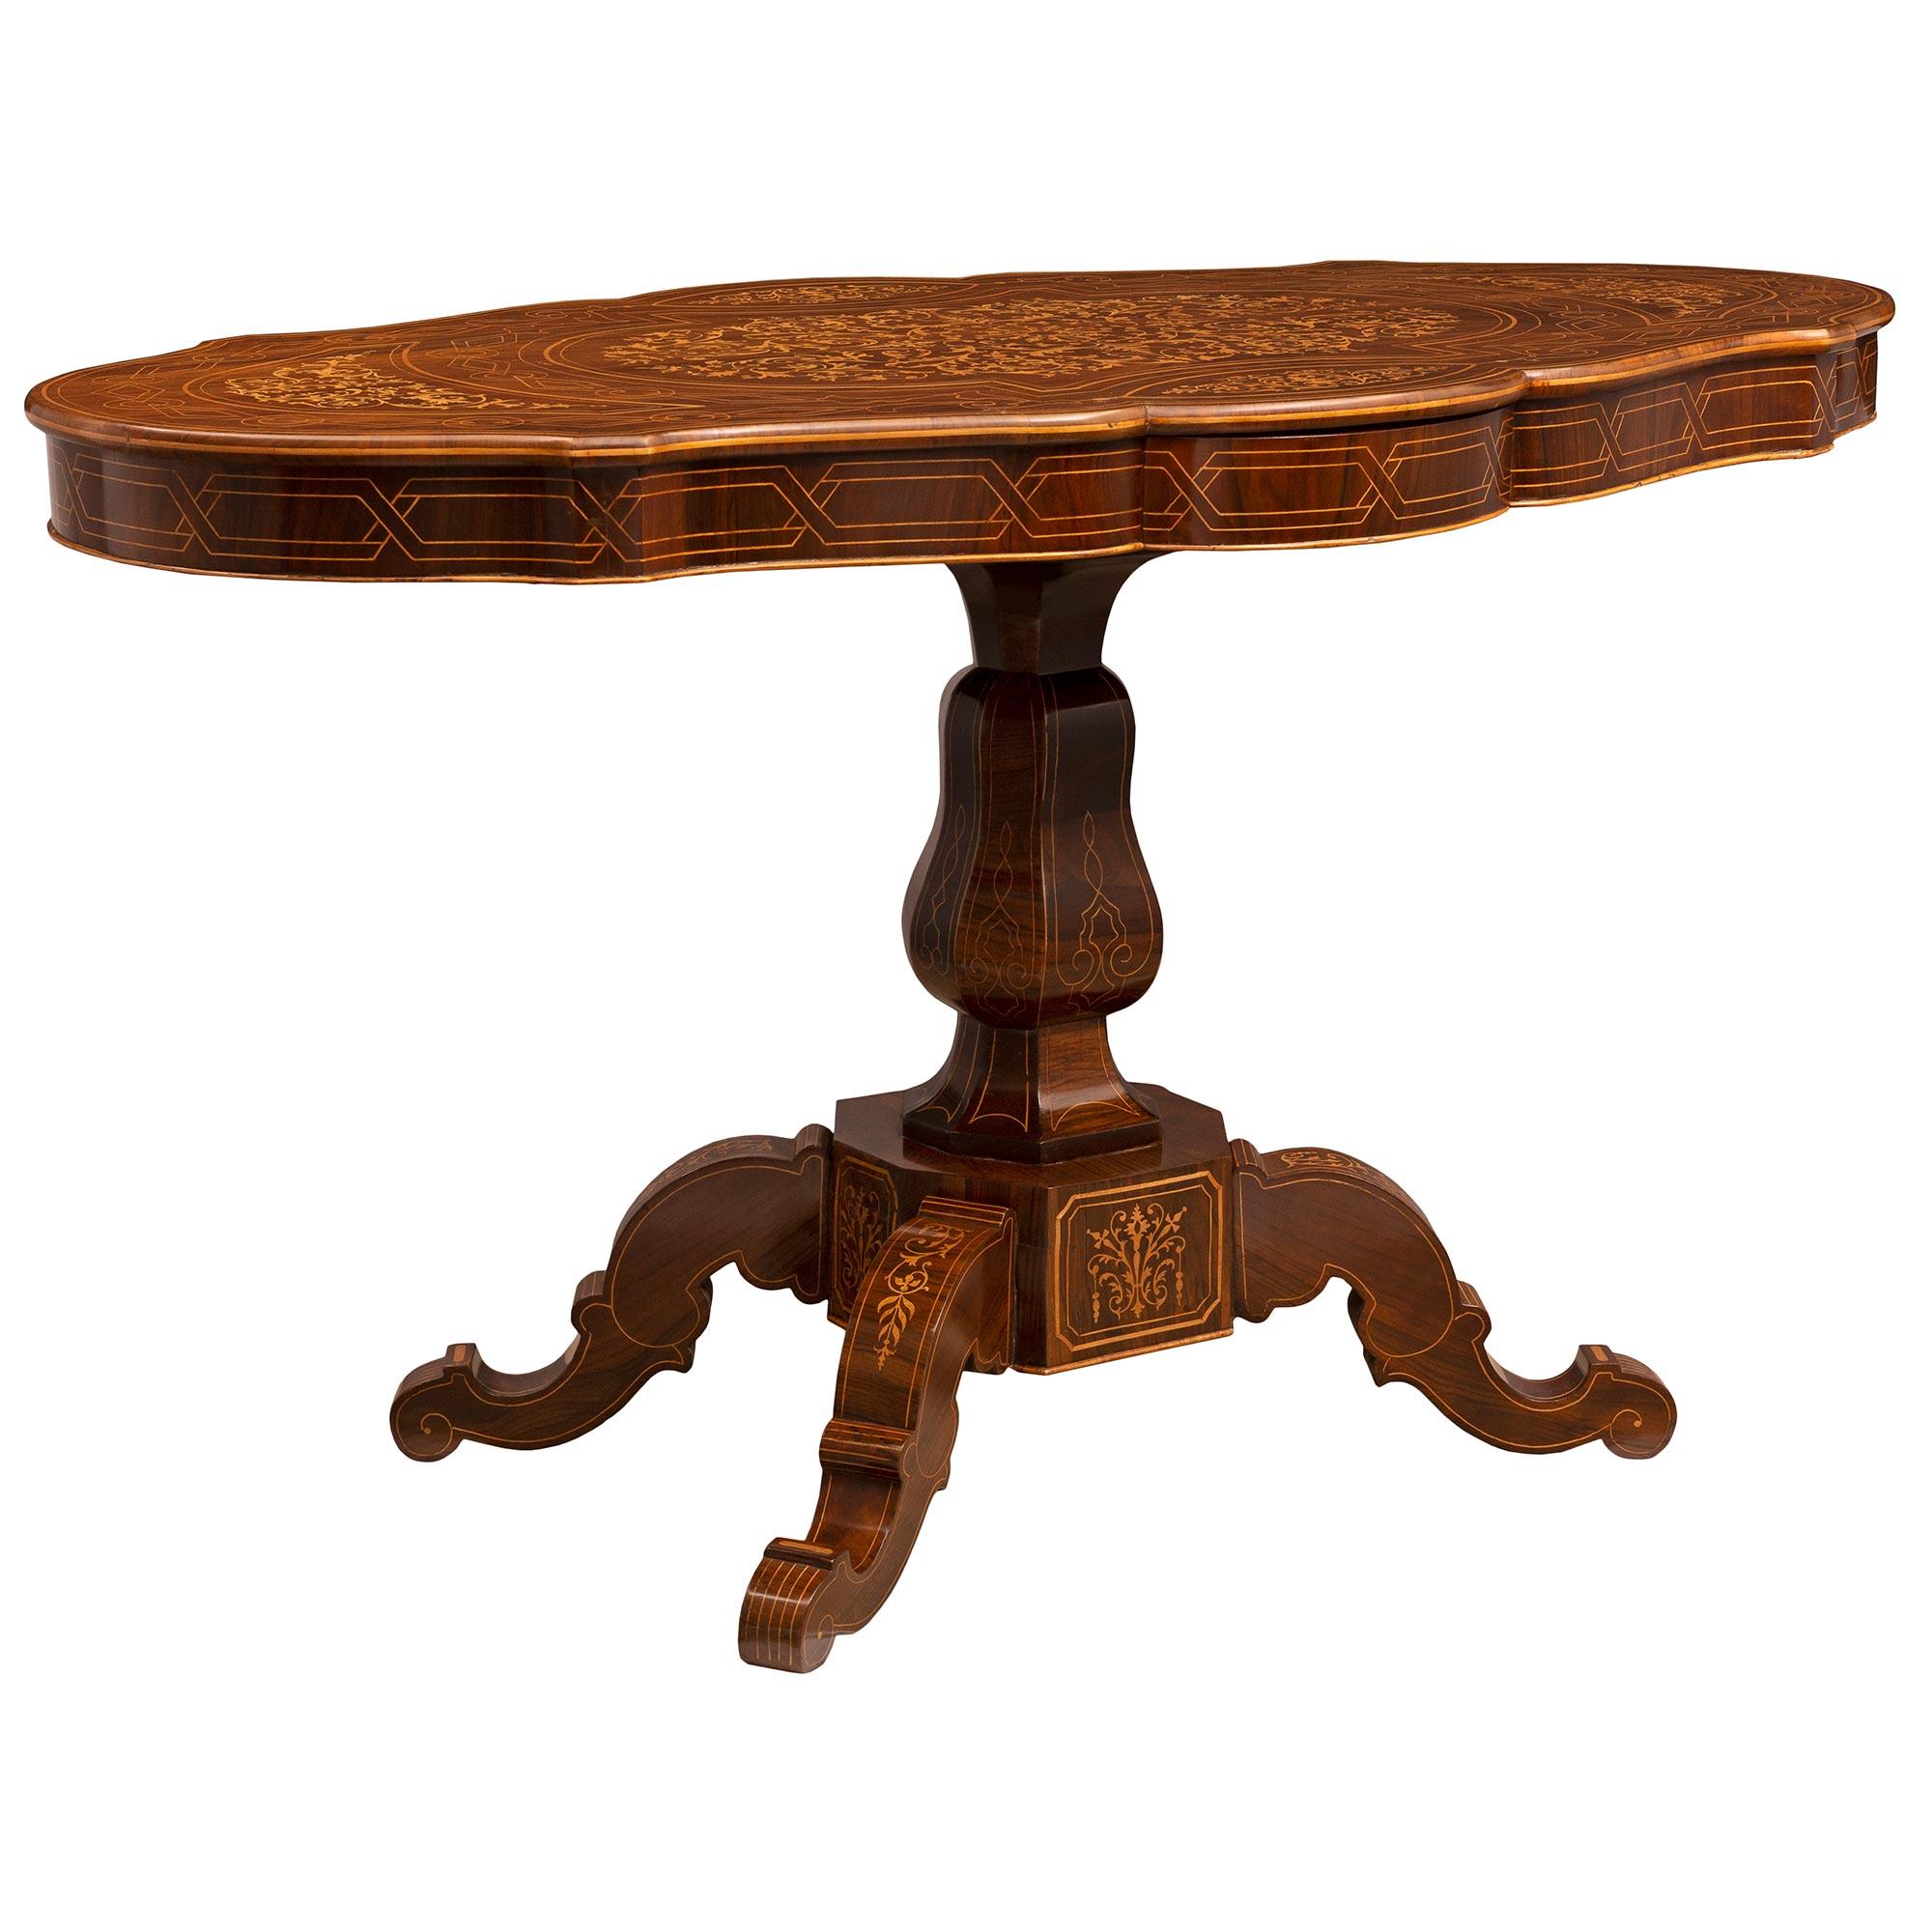 Italian 19th Century Charles X Period Walnut and Maplewood Inlaid Table In Good Condition For Sale In West Palm Beach, FL